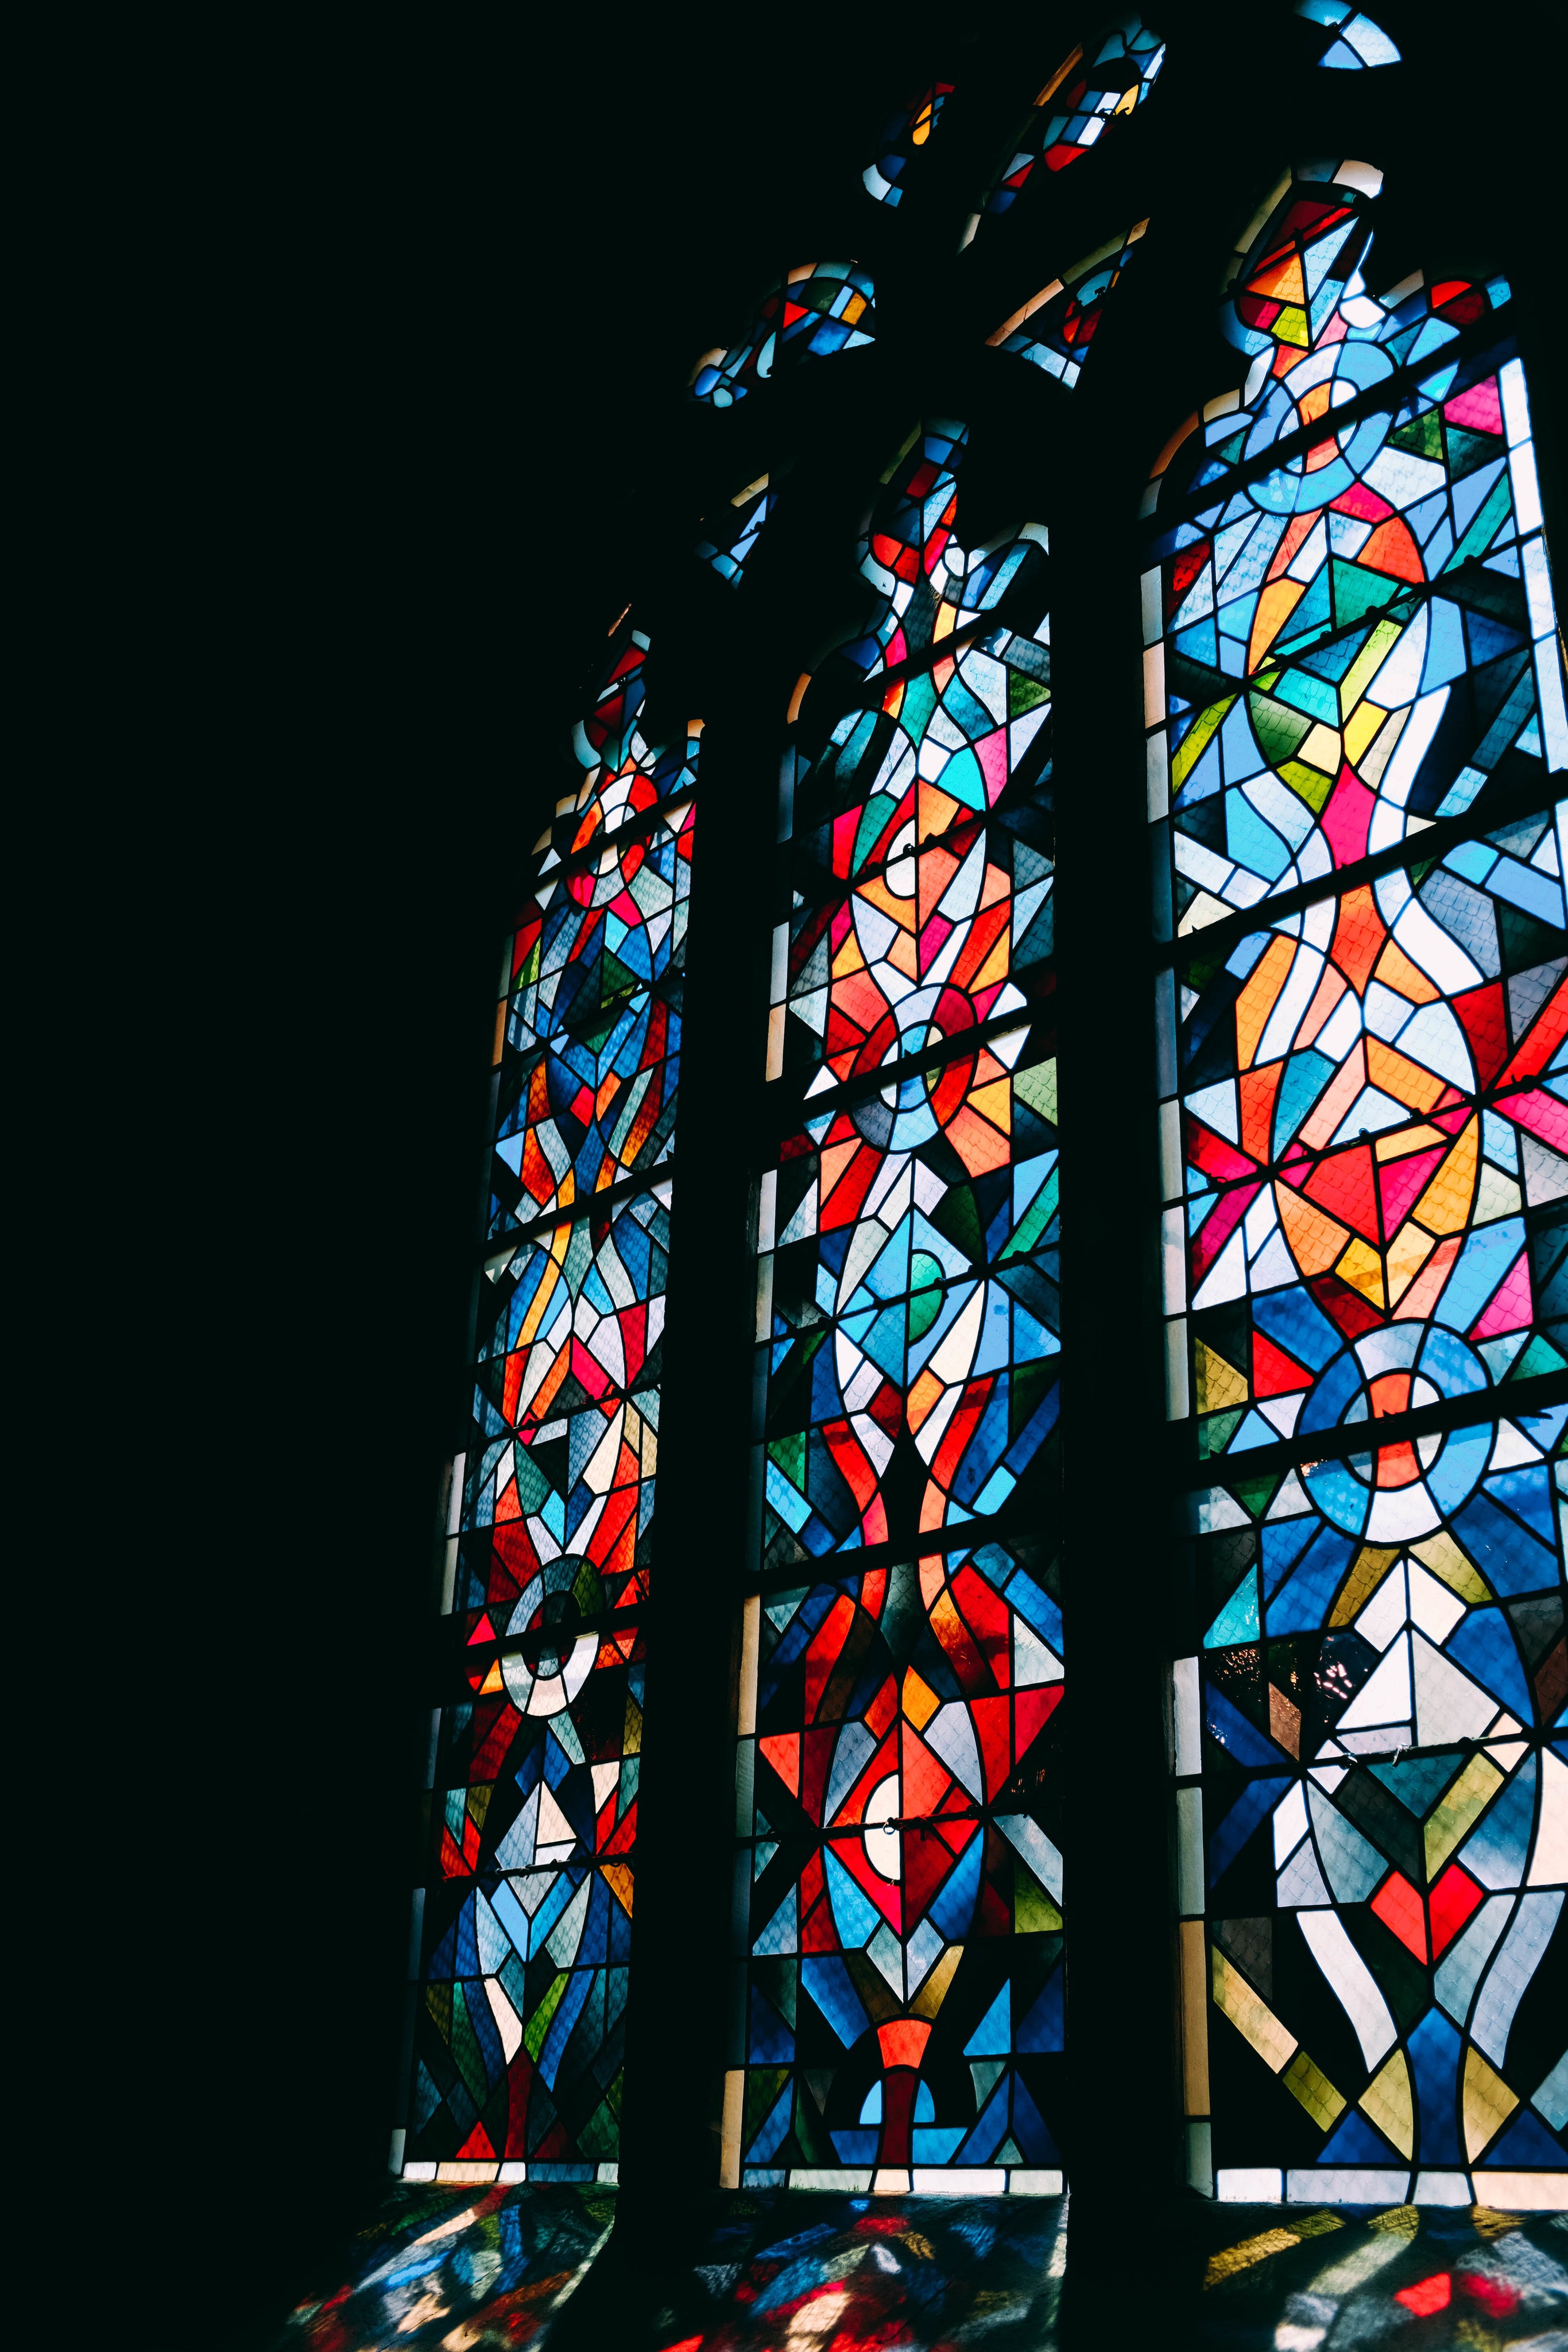 stained-glass-window-panes-in-a-gothic-church-window.jpg